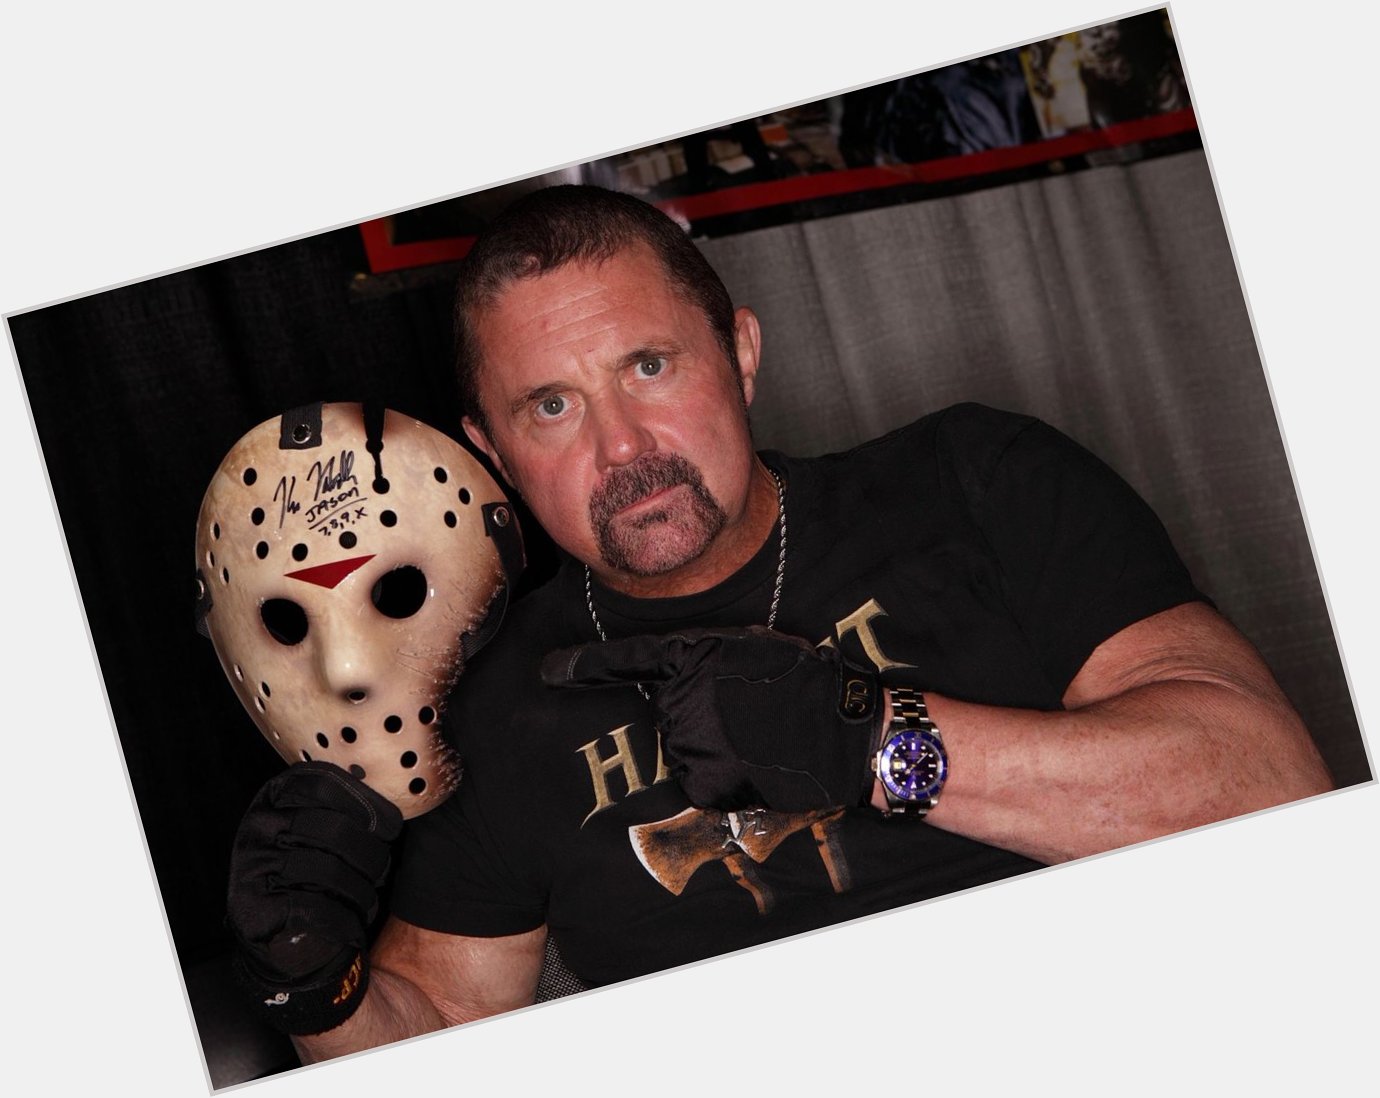 Happy birthday to the legend that is Kane Hodder 

If you ve never heard his story go listen to it it s mind blowing 